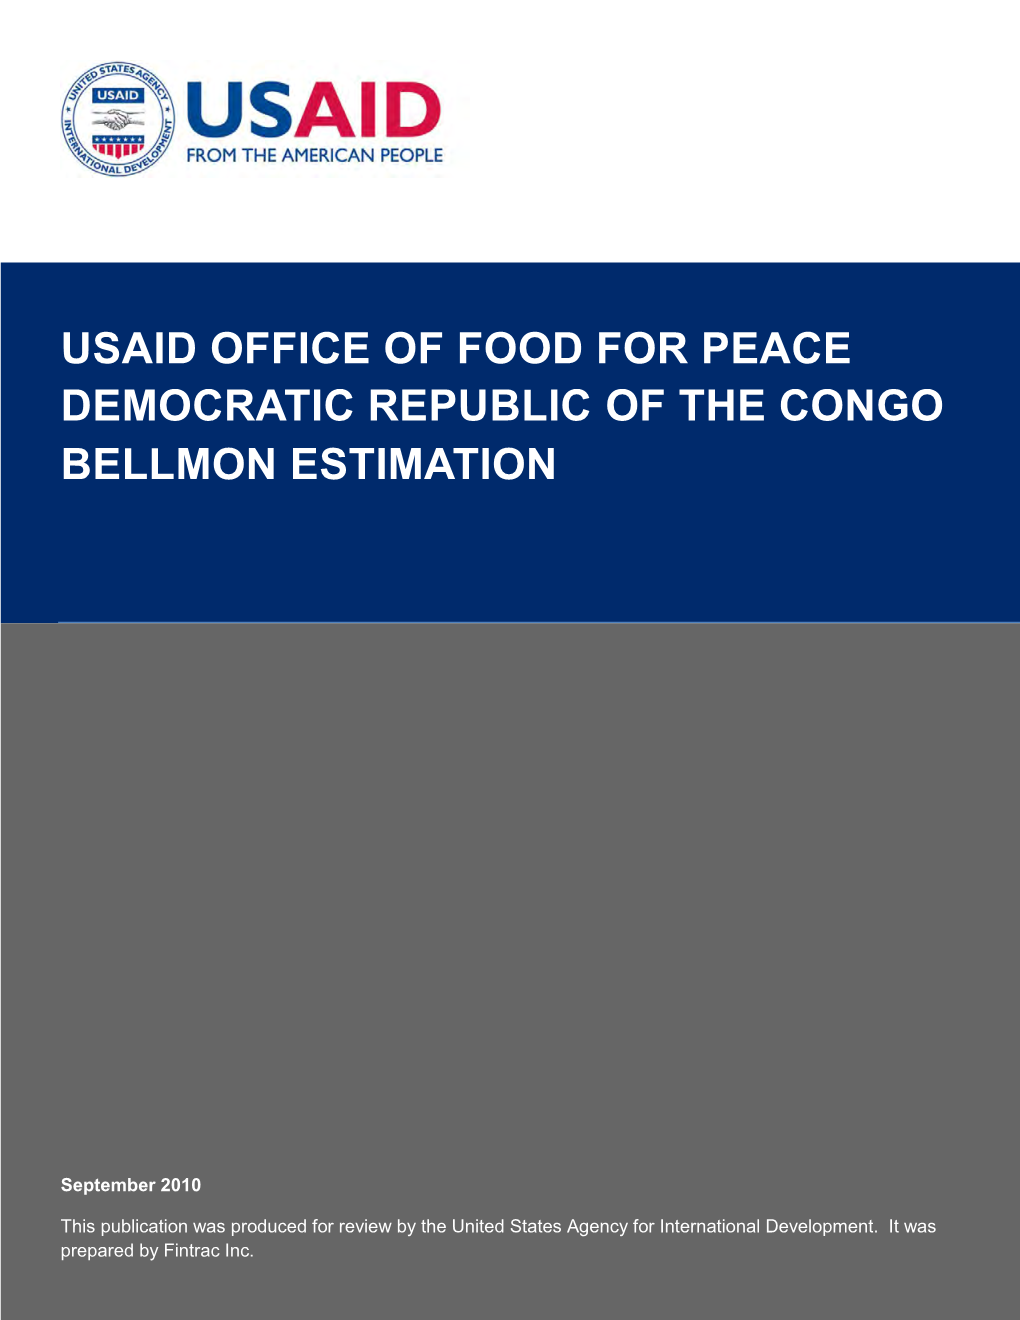 USAID Office of Food for Peace DR Congo Bellmon Estimation